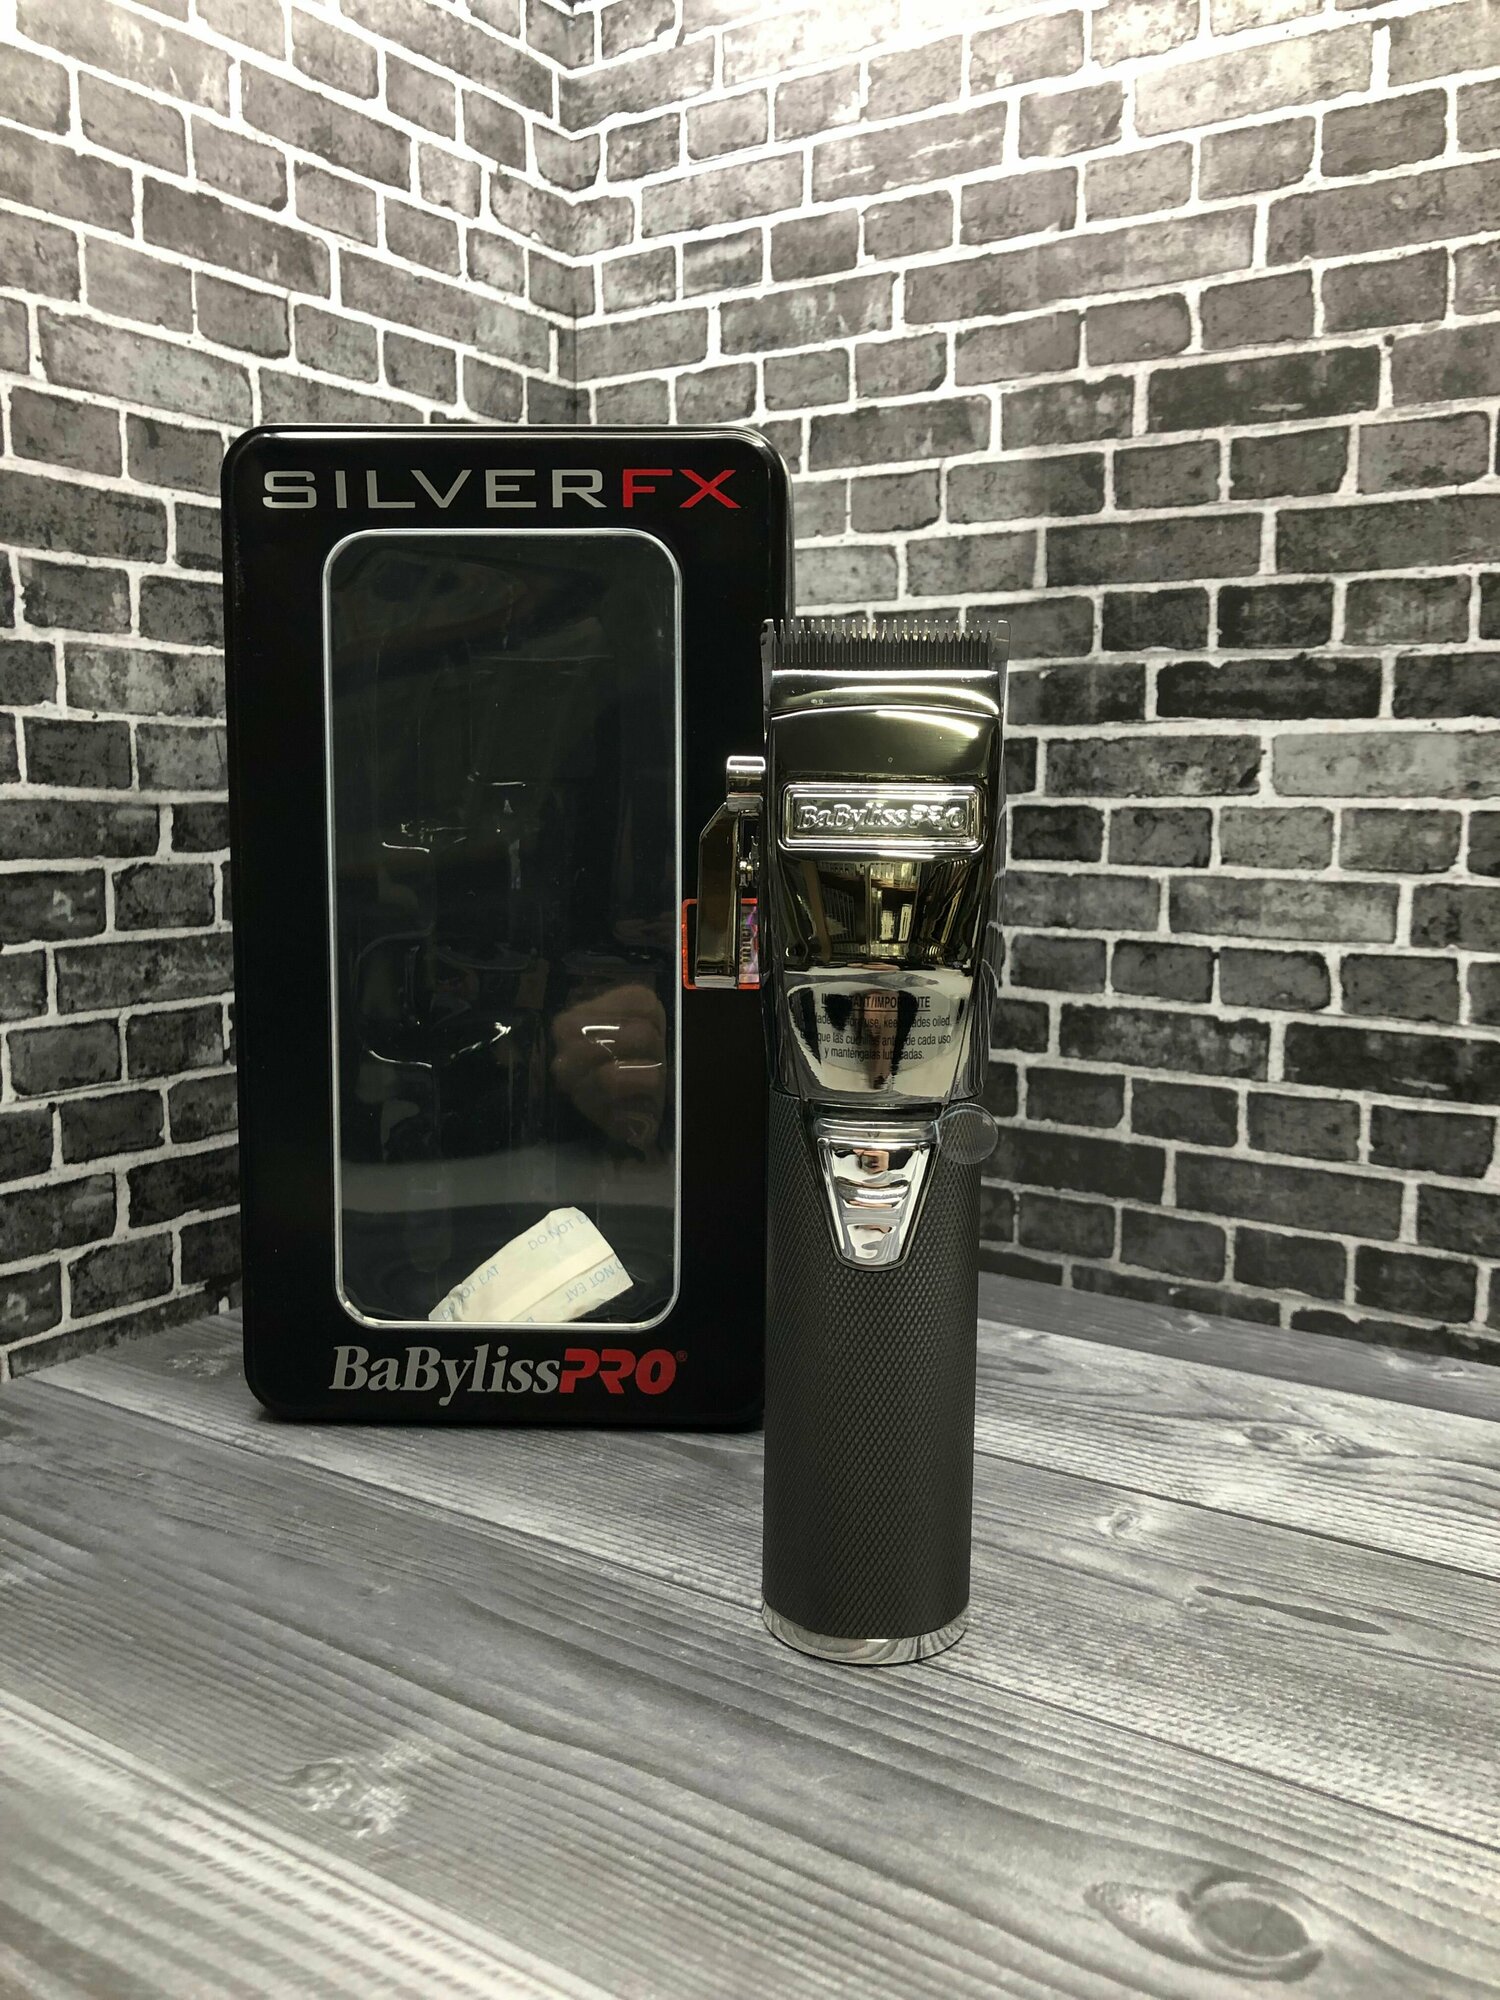 Babyliss pro silver fx